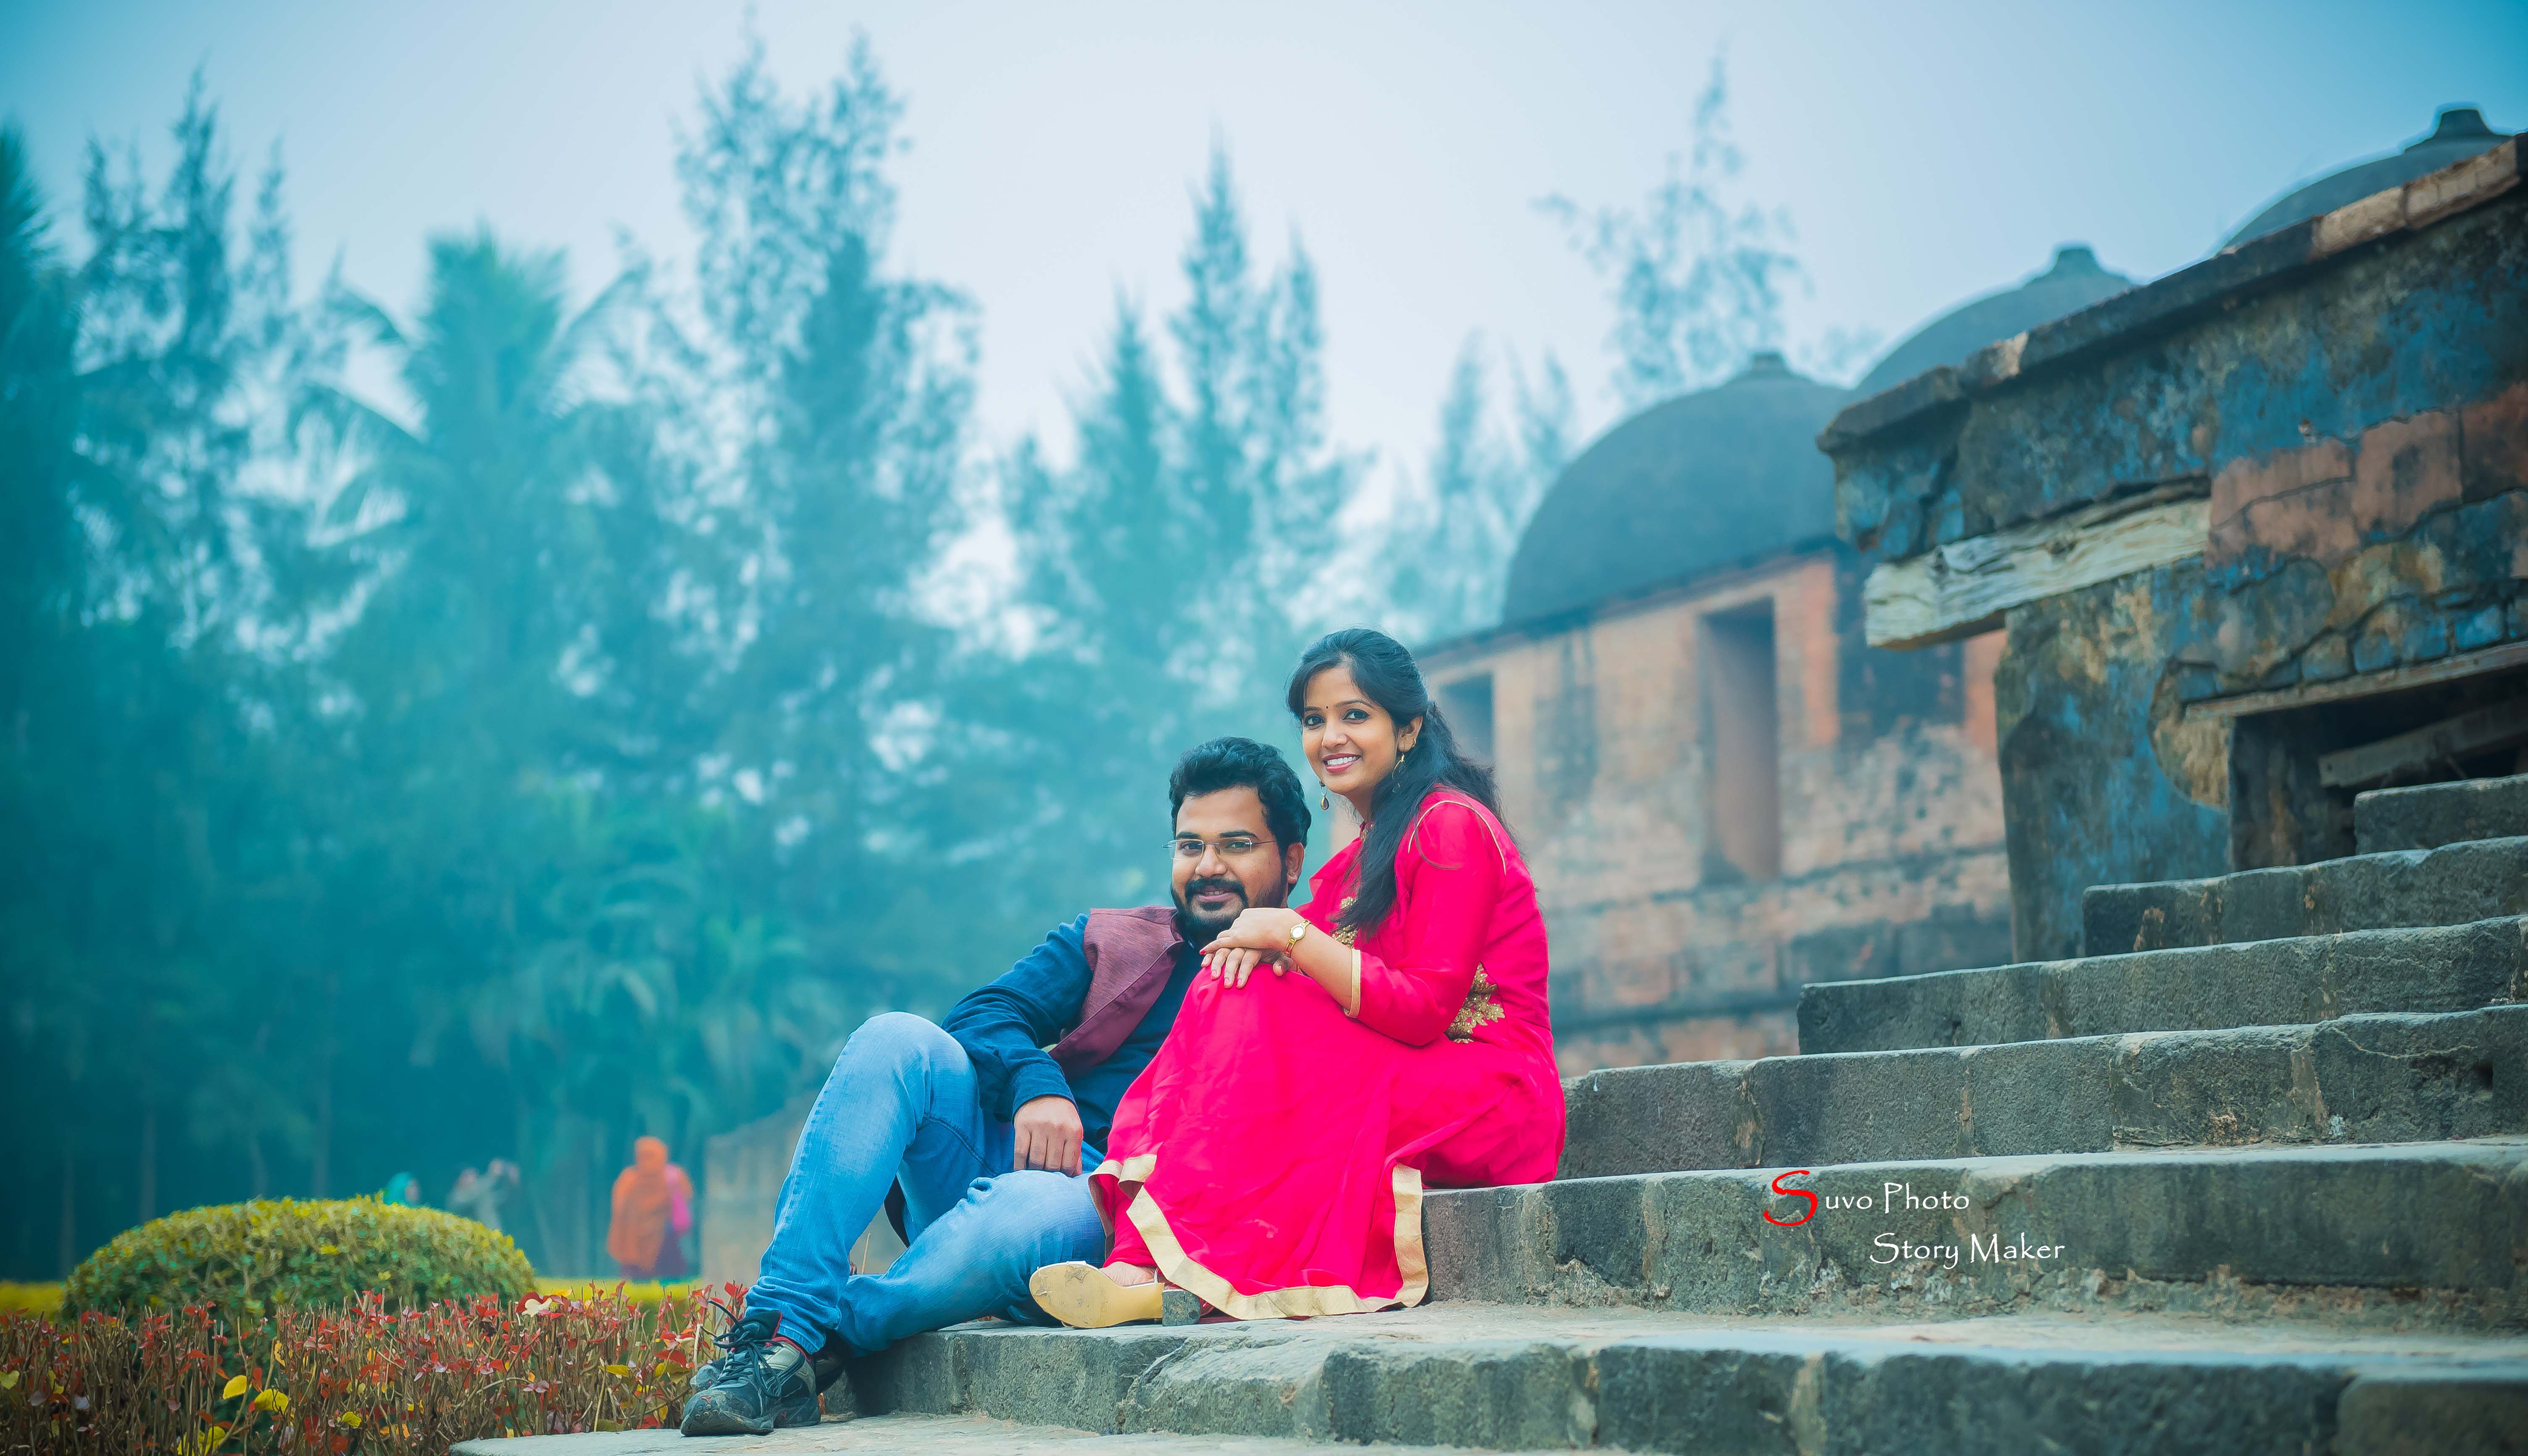 17 Couple Poses You Should Try for a Natural Prewedding Photoshoot